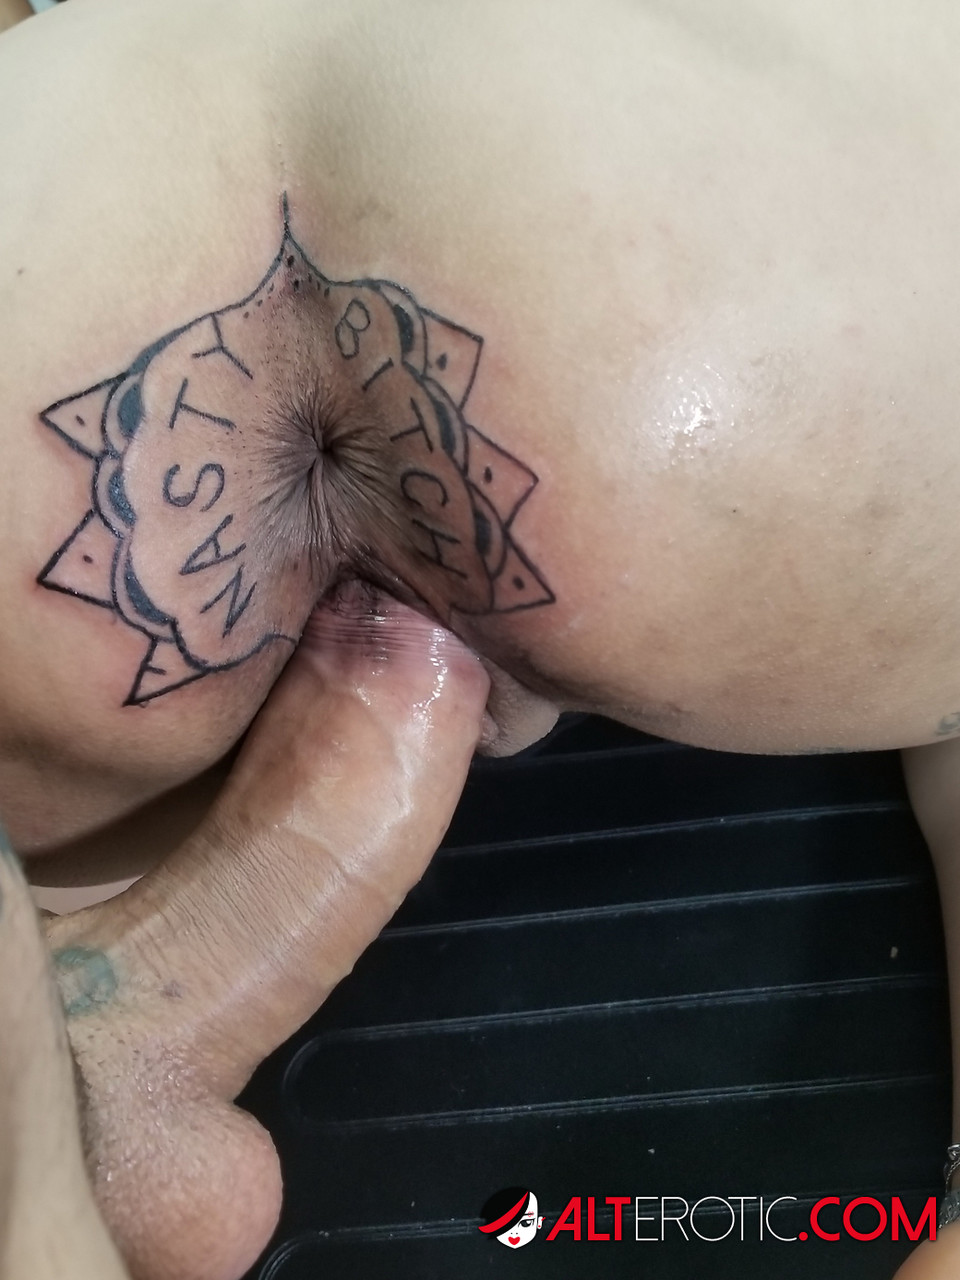 Latina chick Kitty Jaguar gets a butt tattoo before being fucked foto pornográfica #424168461 | Alt Erotic Pics, Kitty Jaguar, Tattoo, pornografia móvel